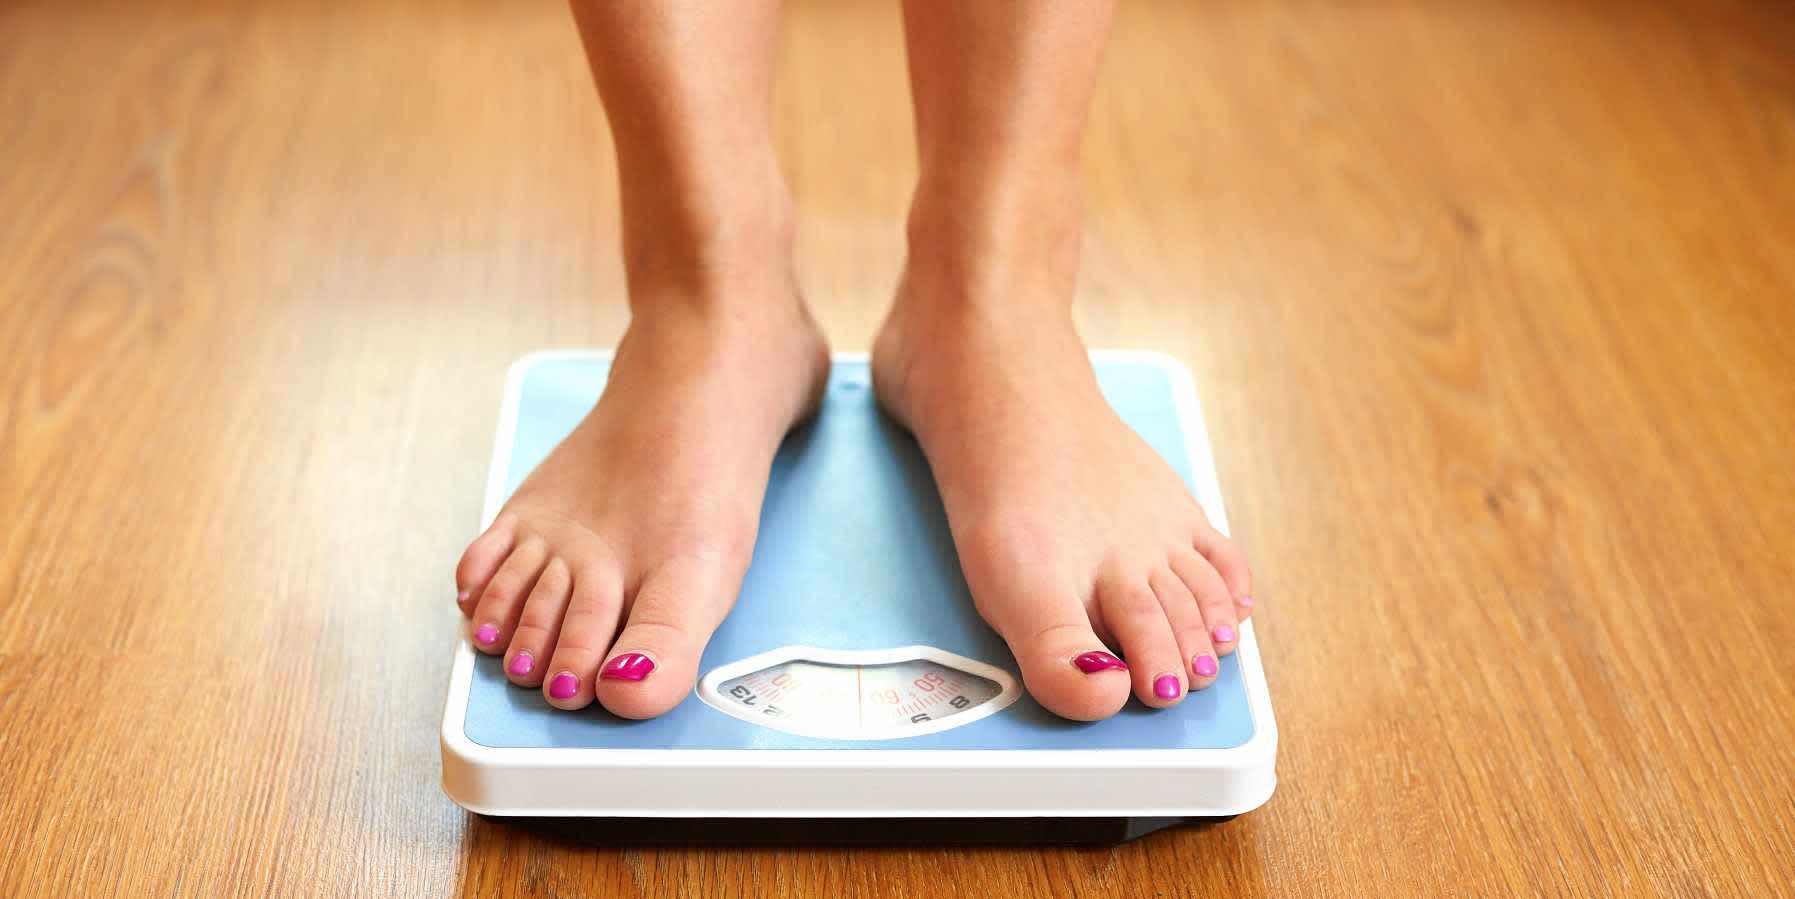 Woman standing on bathroom scale while wondering, "Why does my weight fluctuate so much?"